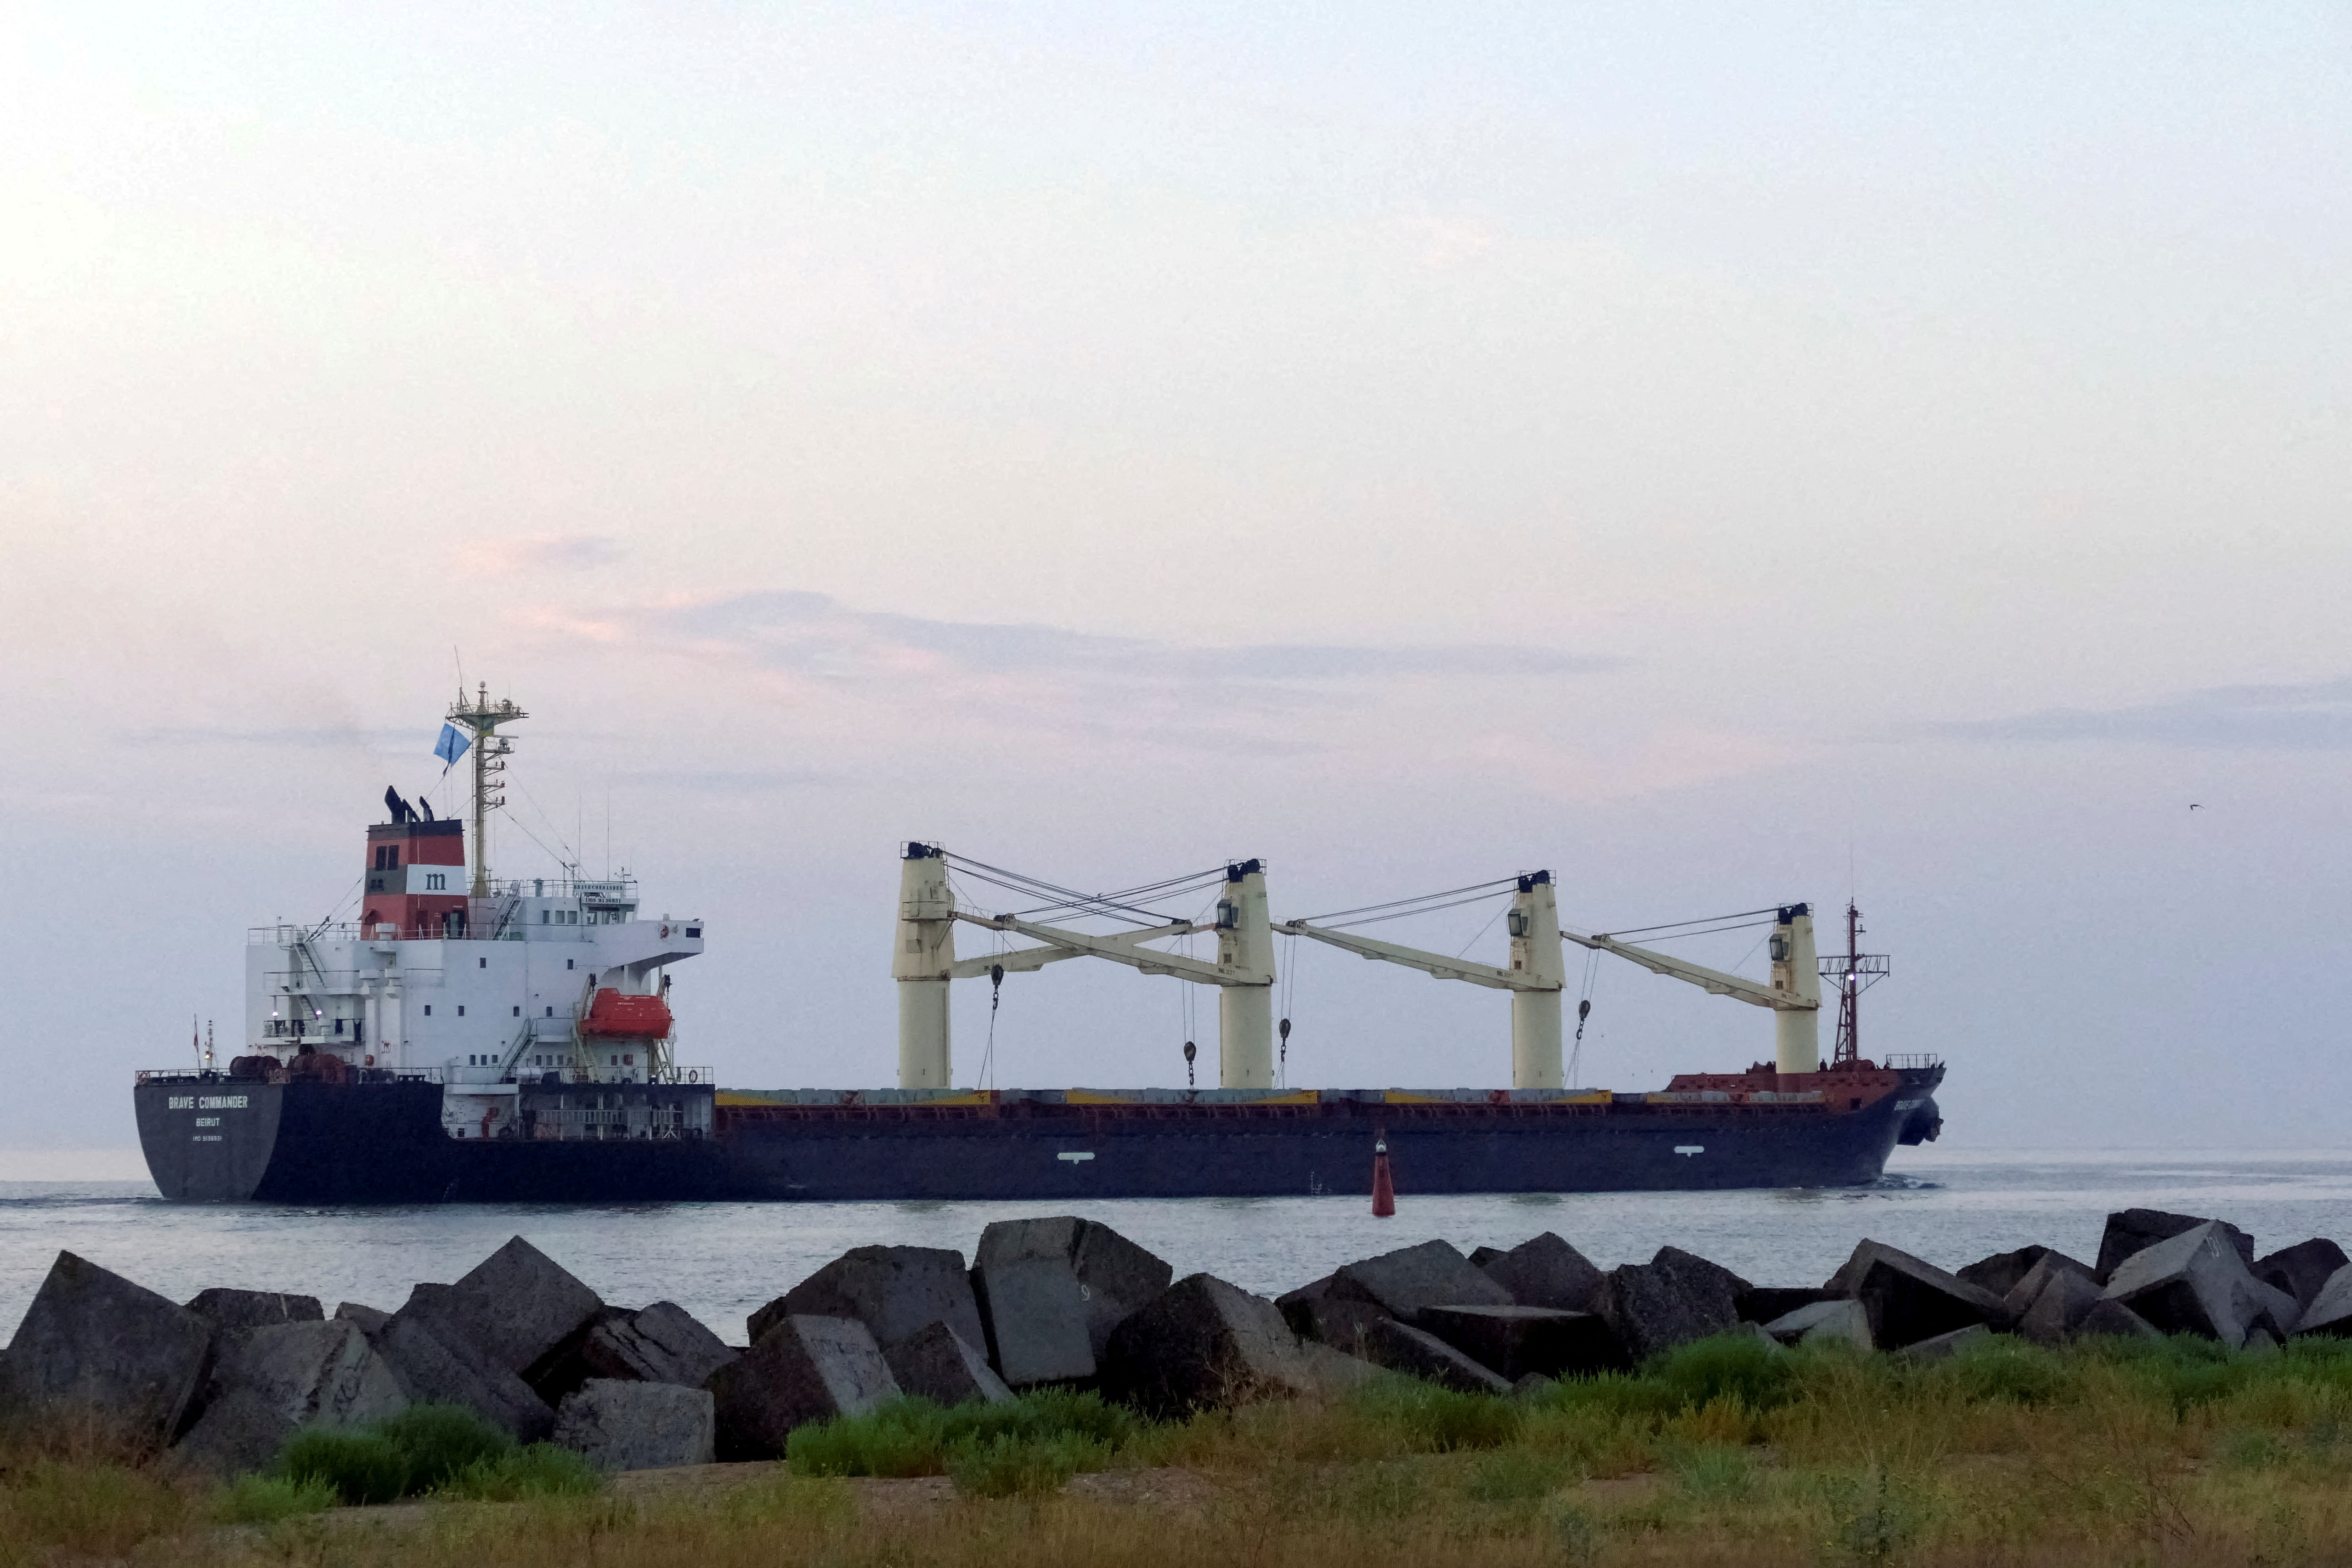 Lebanese-flagged bulk carrier Brave Commander leaves the sea port of Pivdennyi with wheat for Ethiopia, in the town of Yuzhne